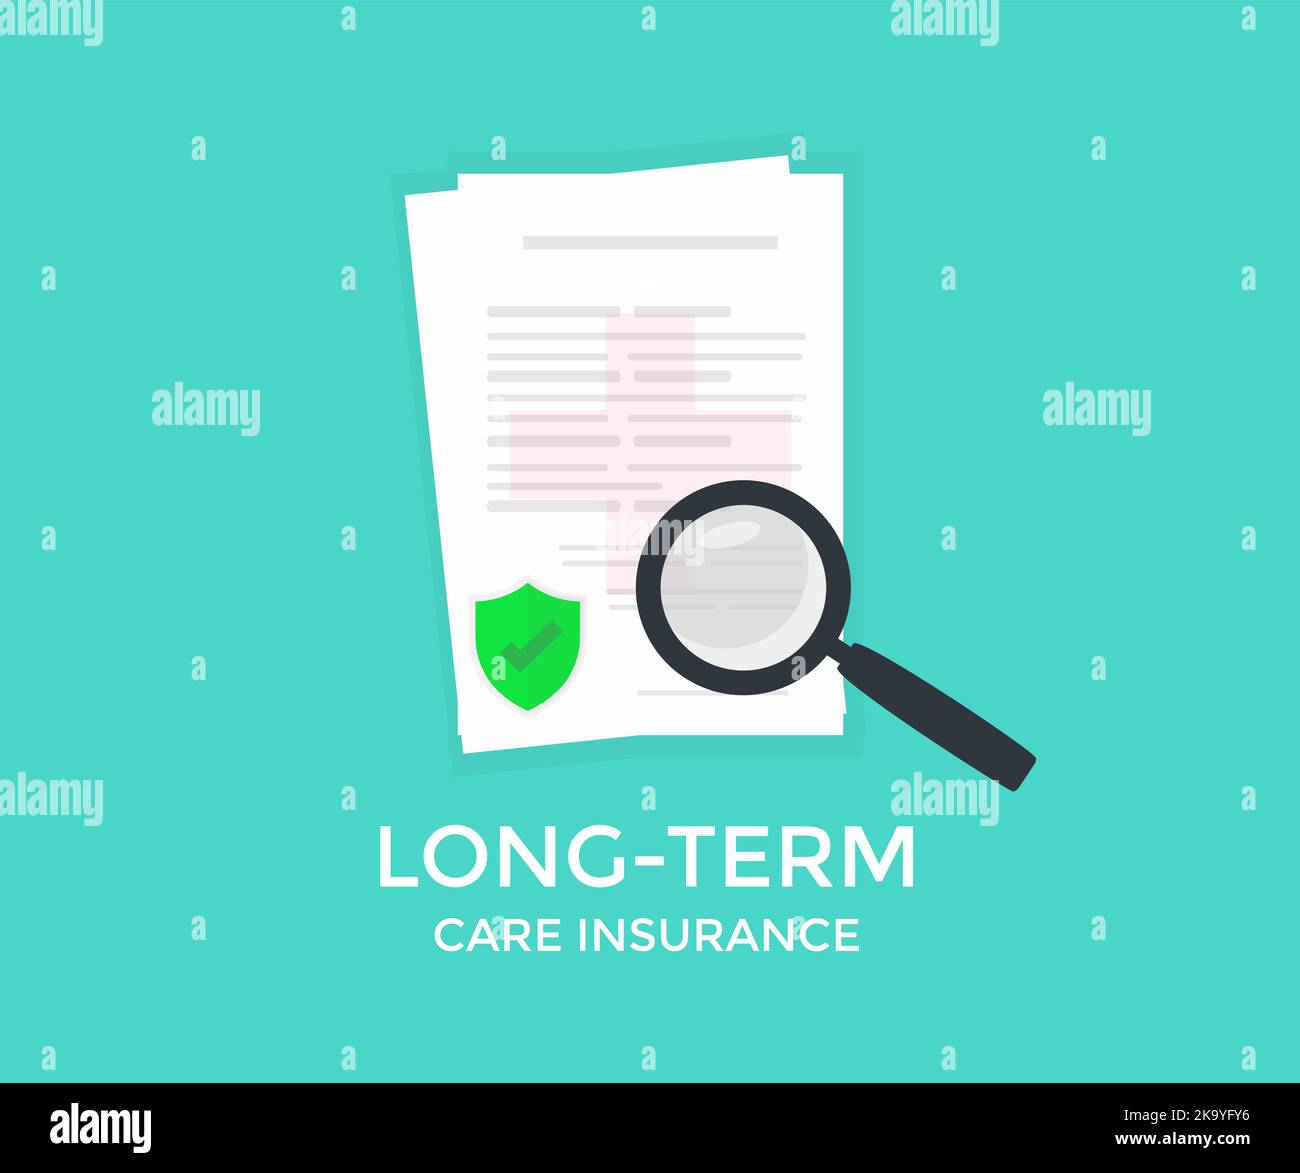 Long-term care insurance form logo design. Medical and healthcare concept vector design and illustration. Stock Vector